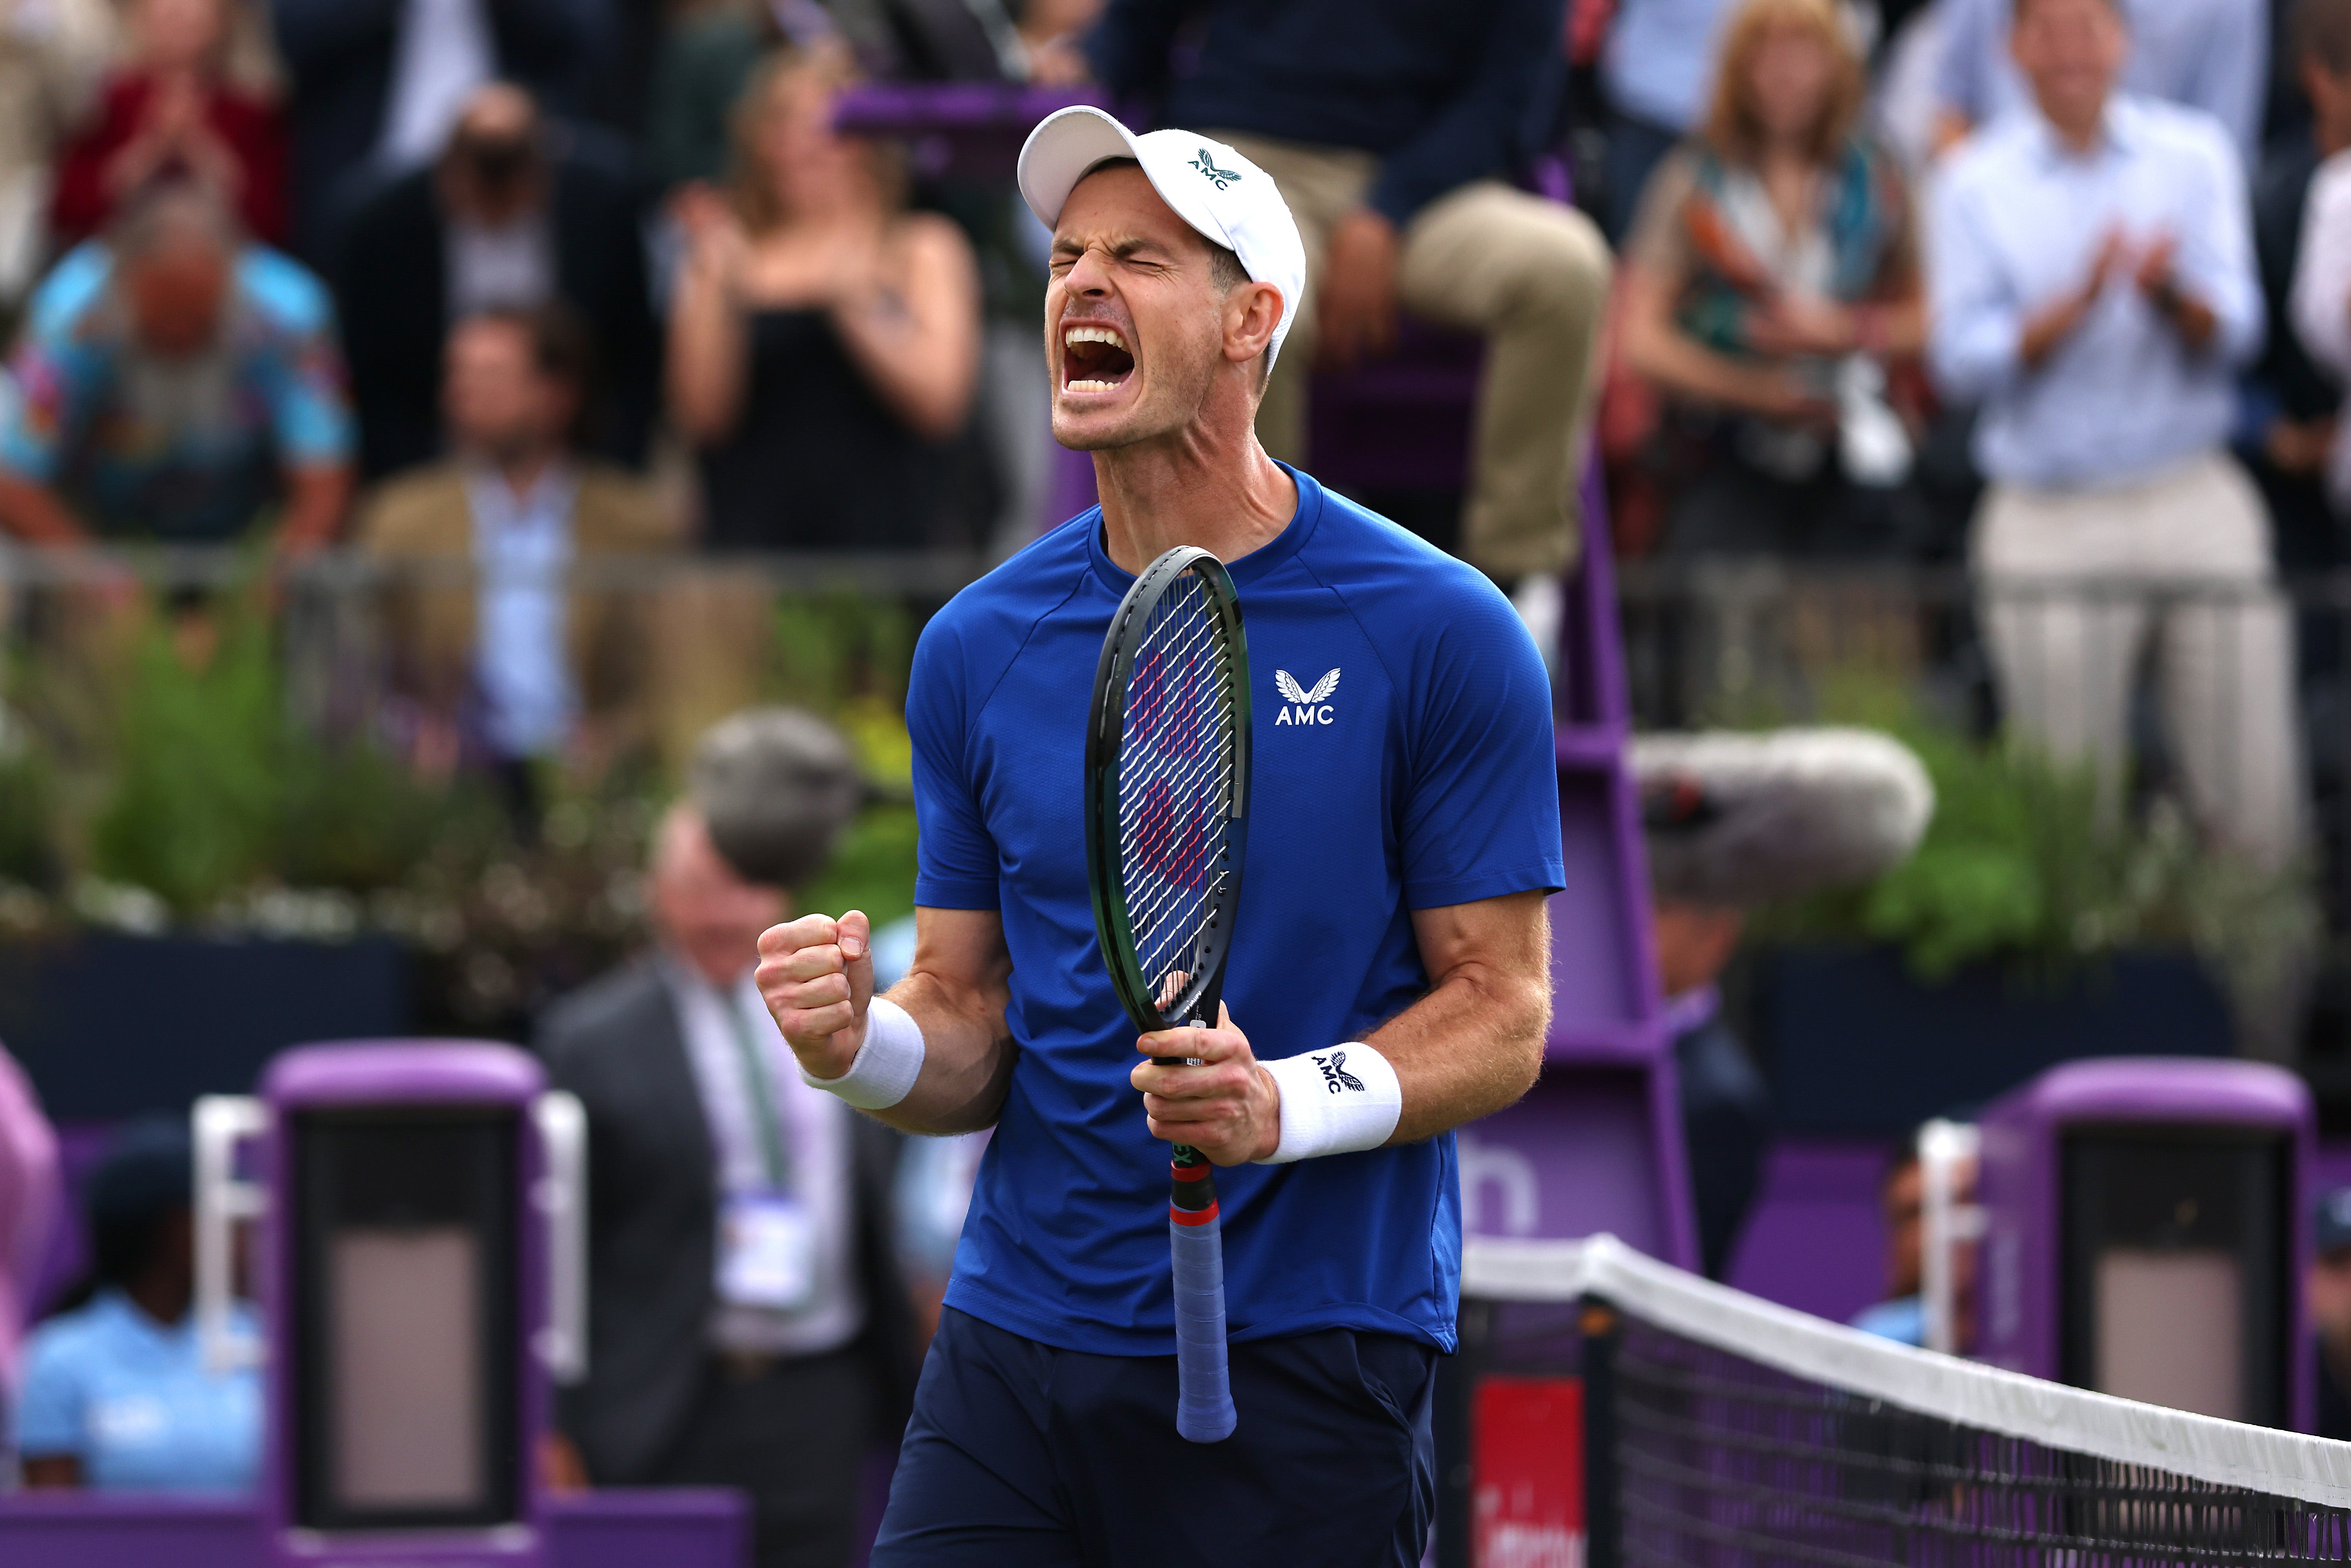 Andy Murray won his first tour-level match since March with a first-round win at Queen’s on Tuesday